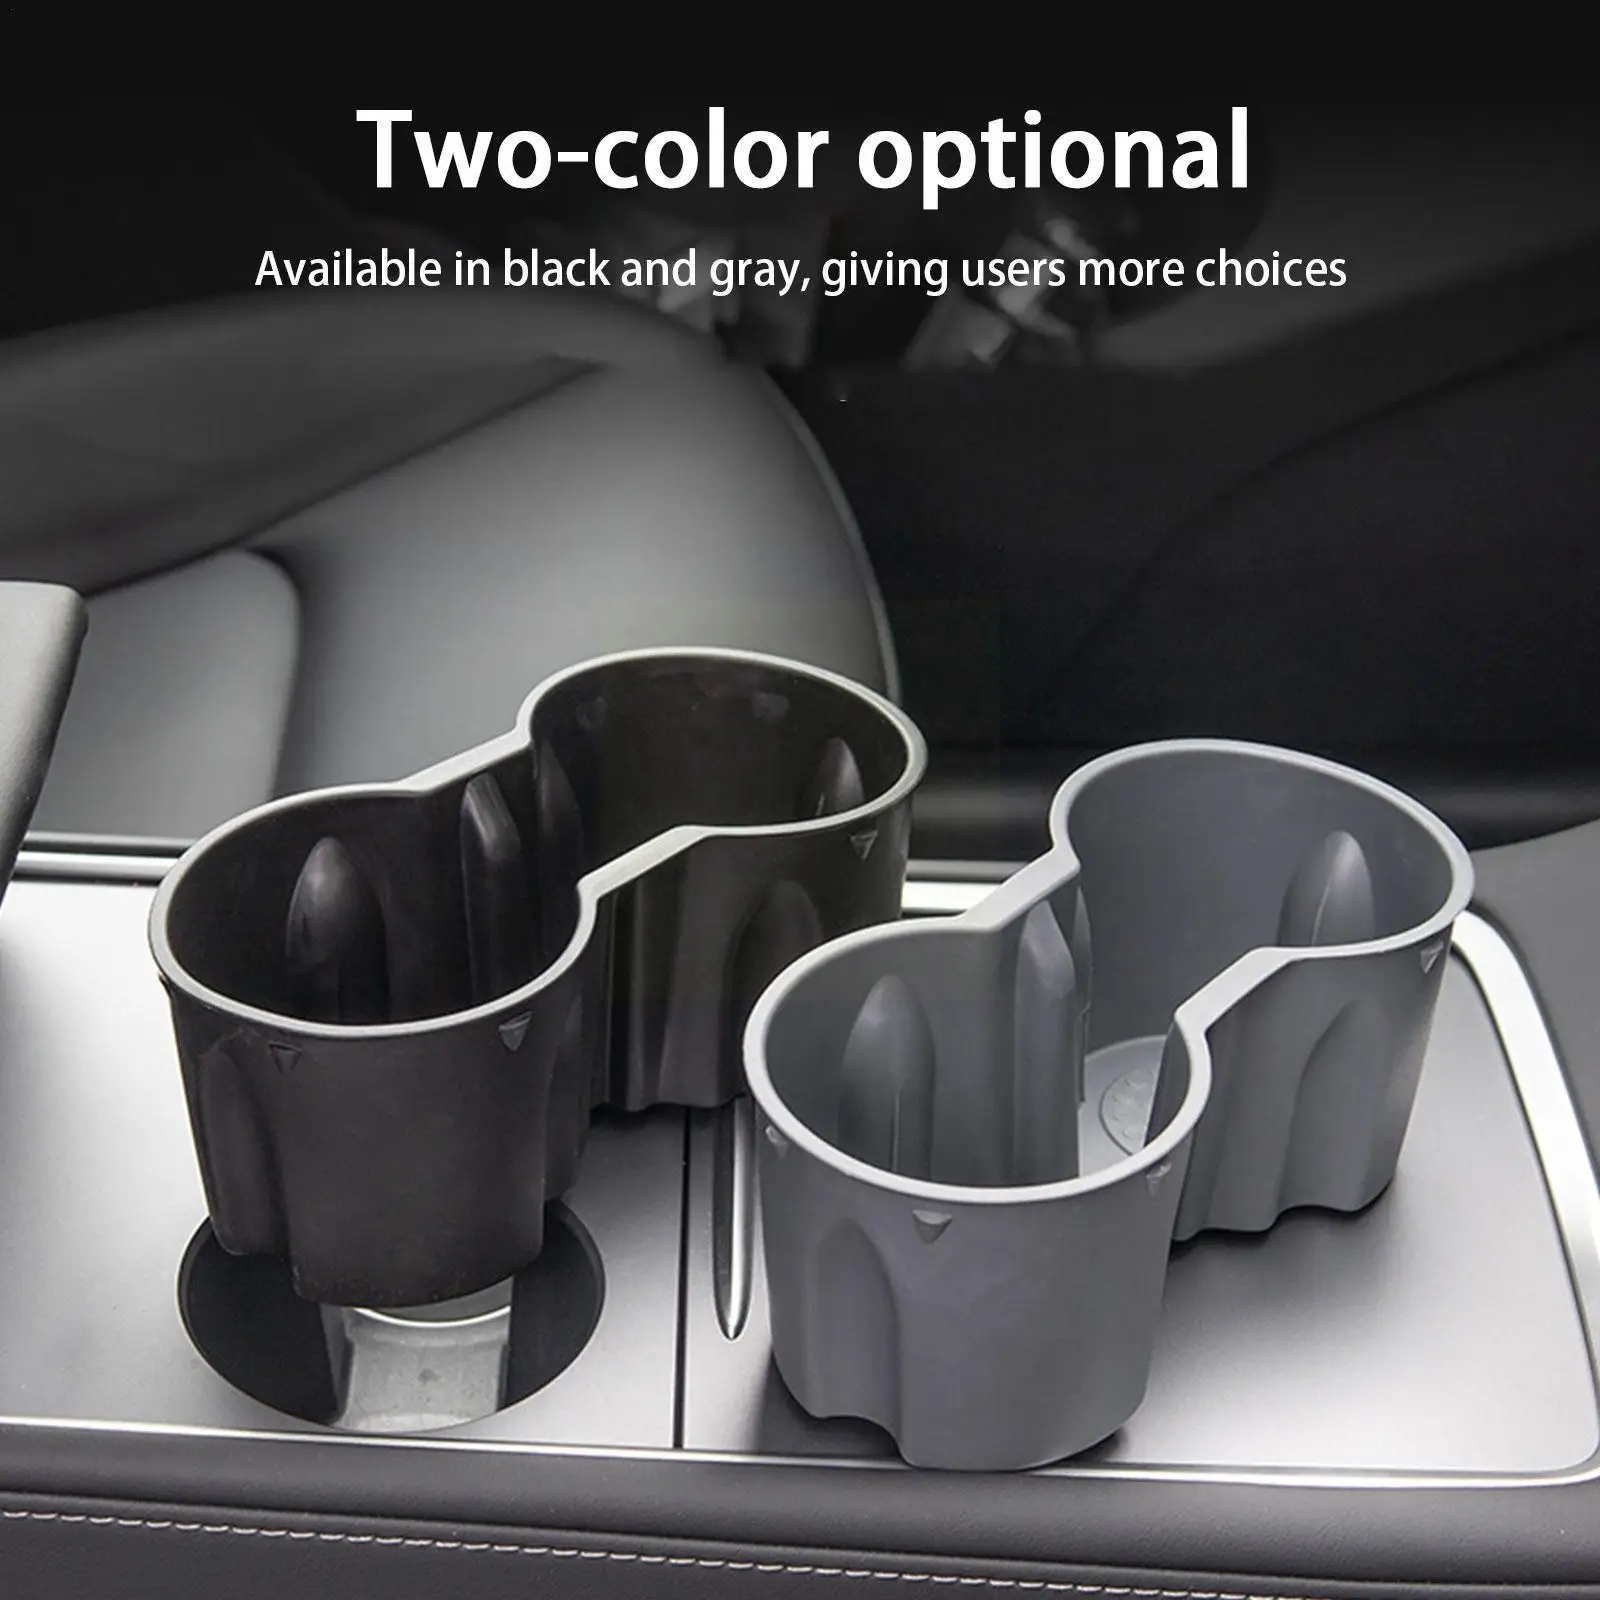 

For Model 3/y Console Drinking Bottle Insert Pvc Universal Double Cup Water Hole Holder Holder Car F3e2